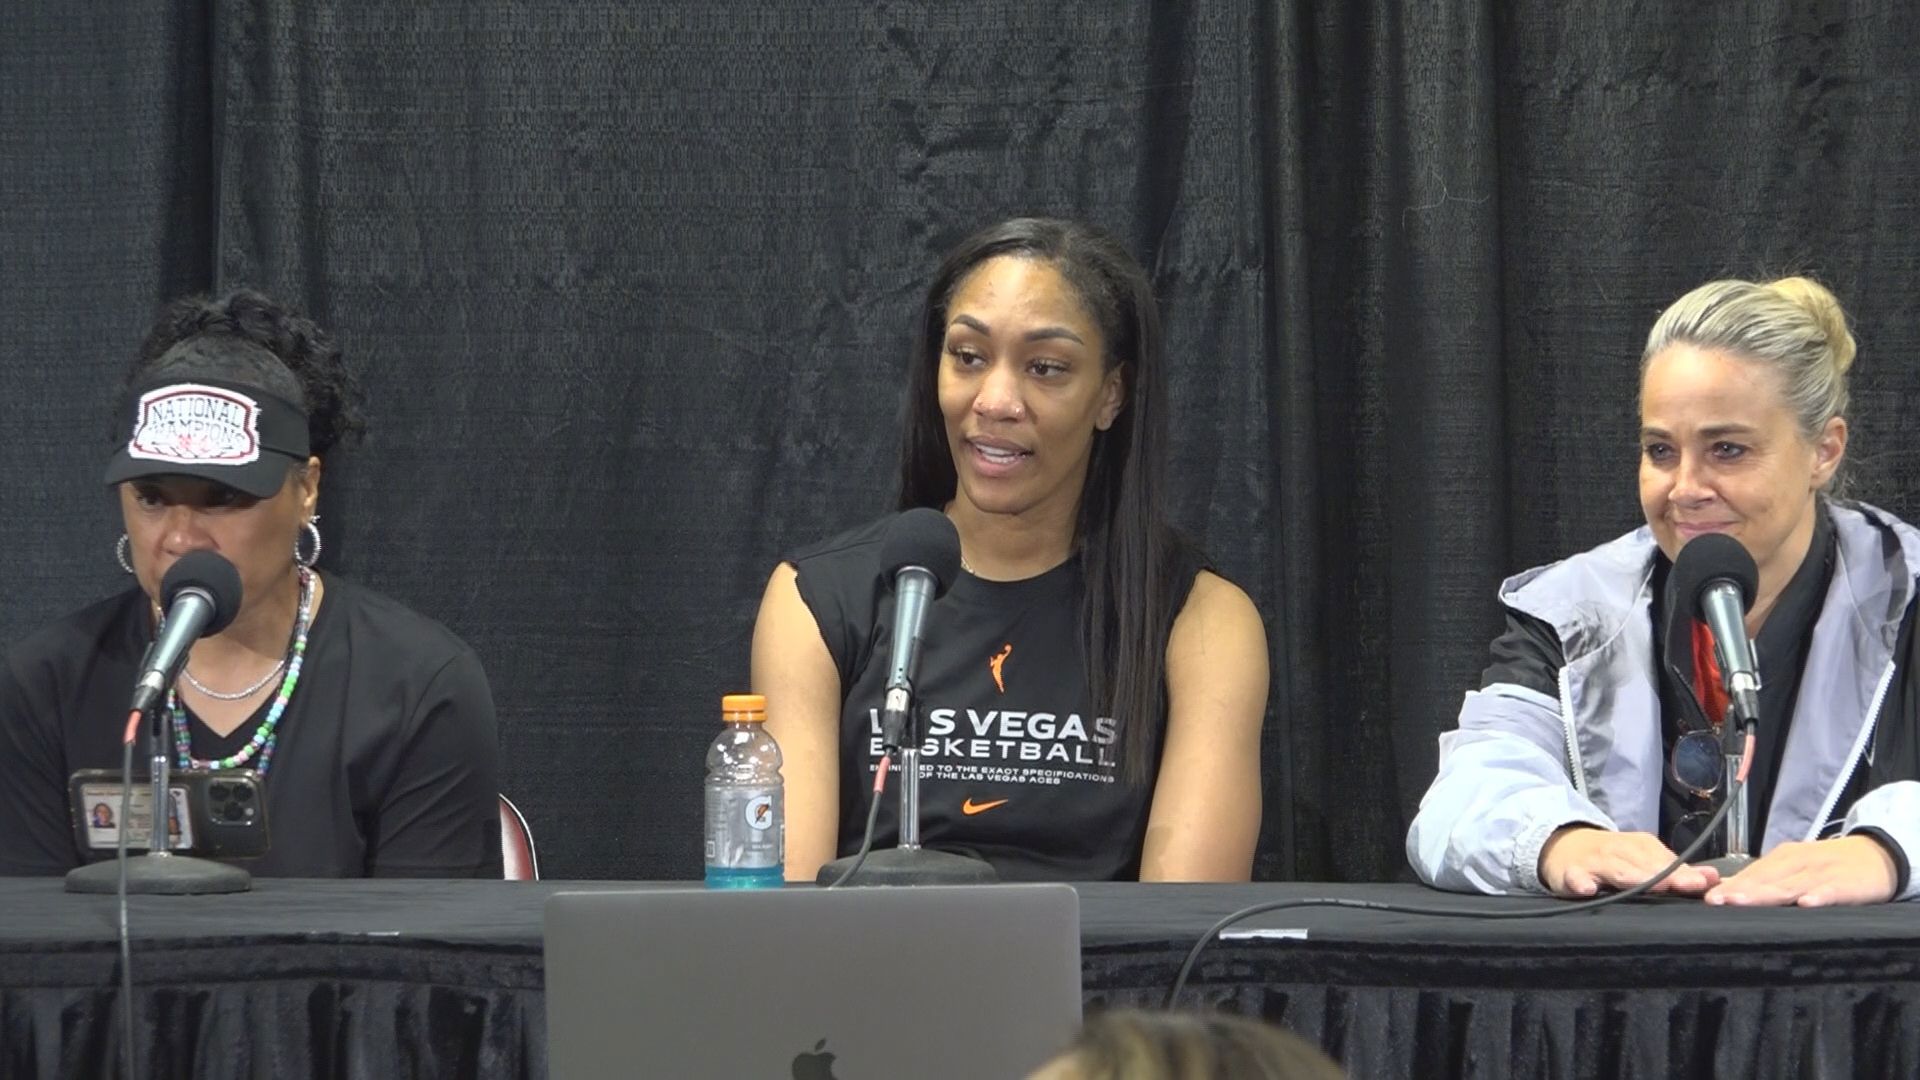 News 19's Whitney Sullivan asked A'ja Wilson and Coach Staley what they believe is necessary to move the needle forward regarding the gender wage gap in basketball.